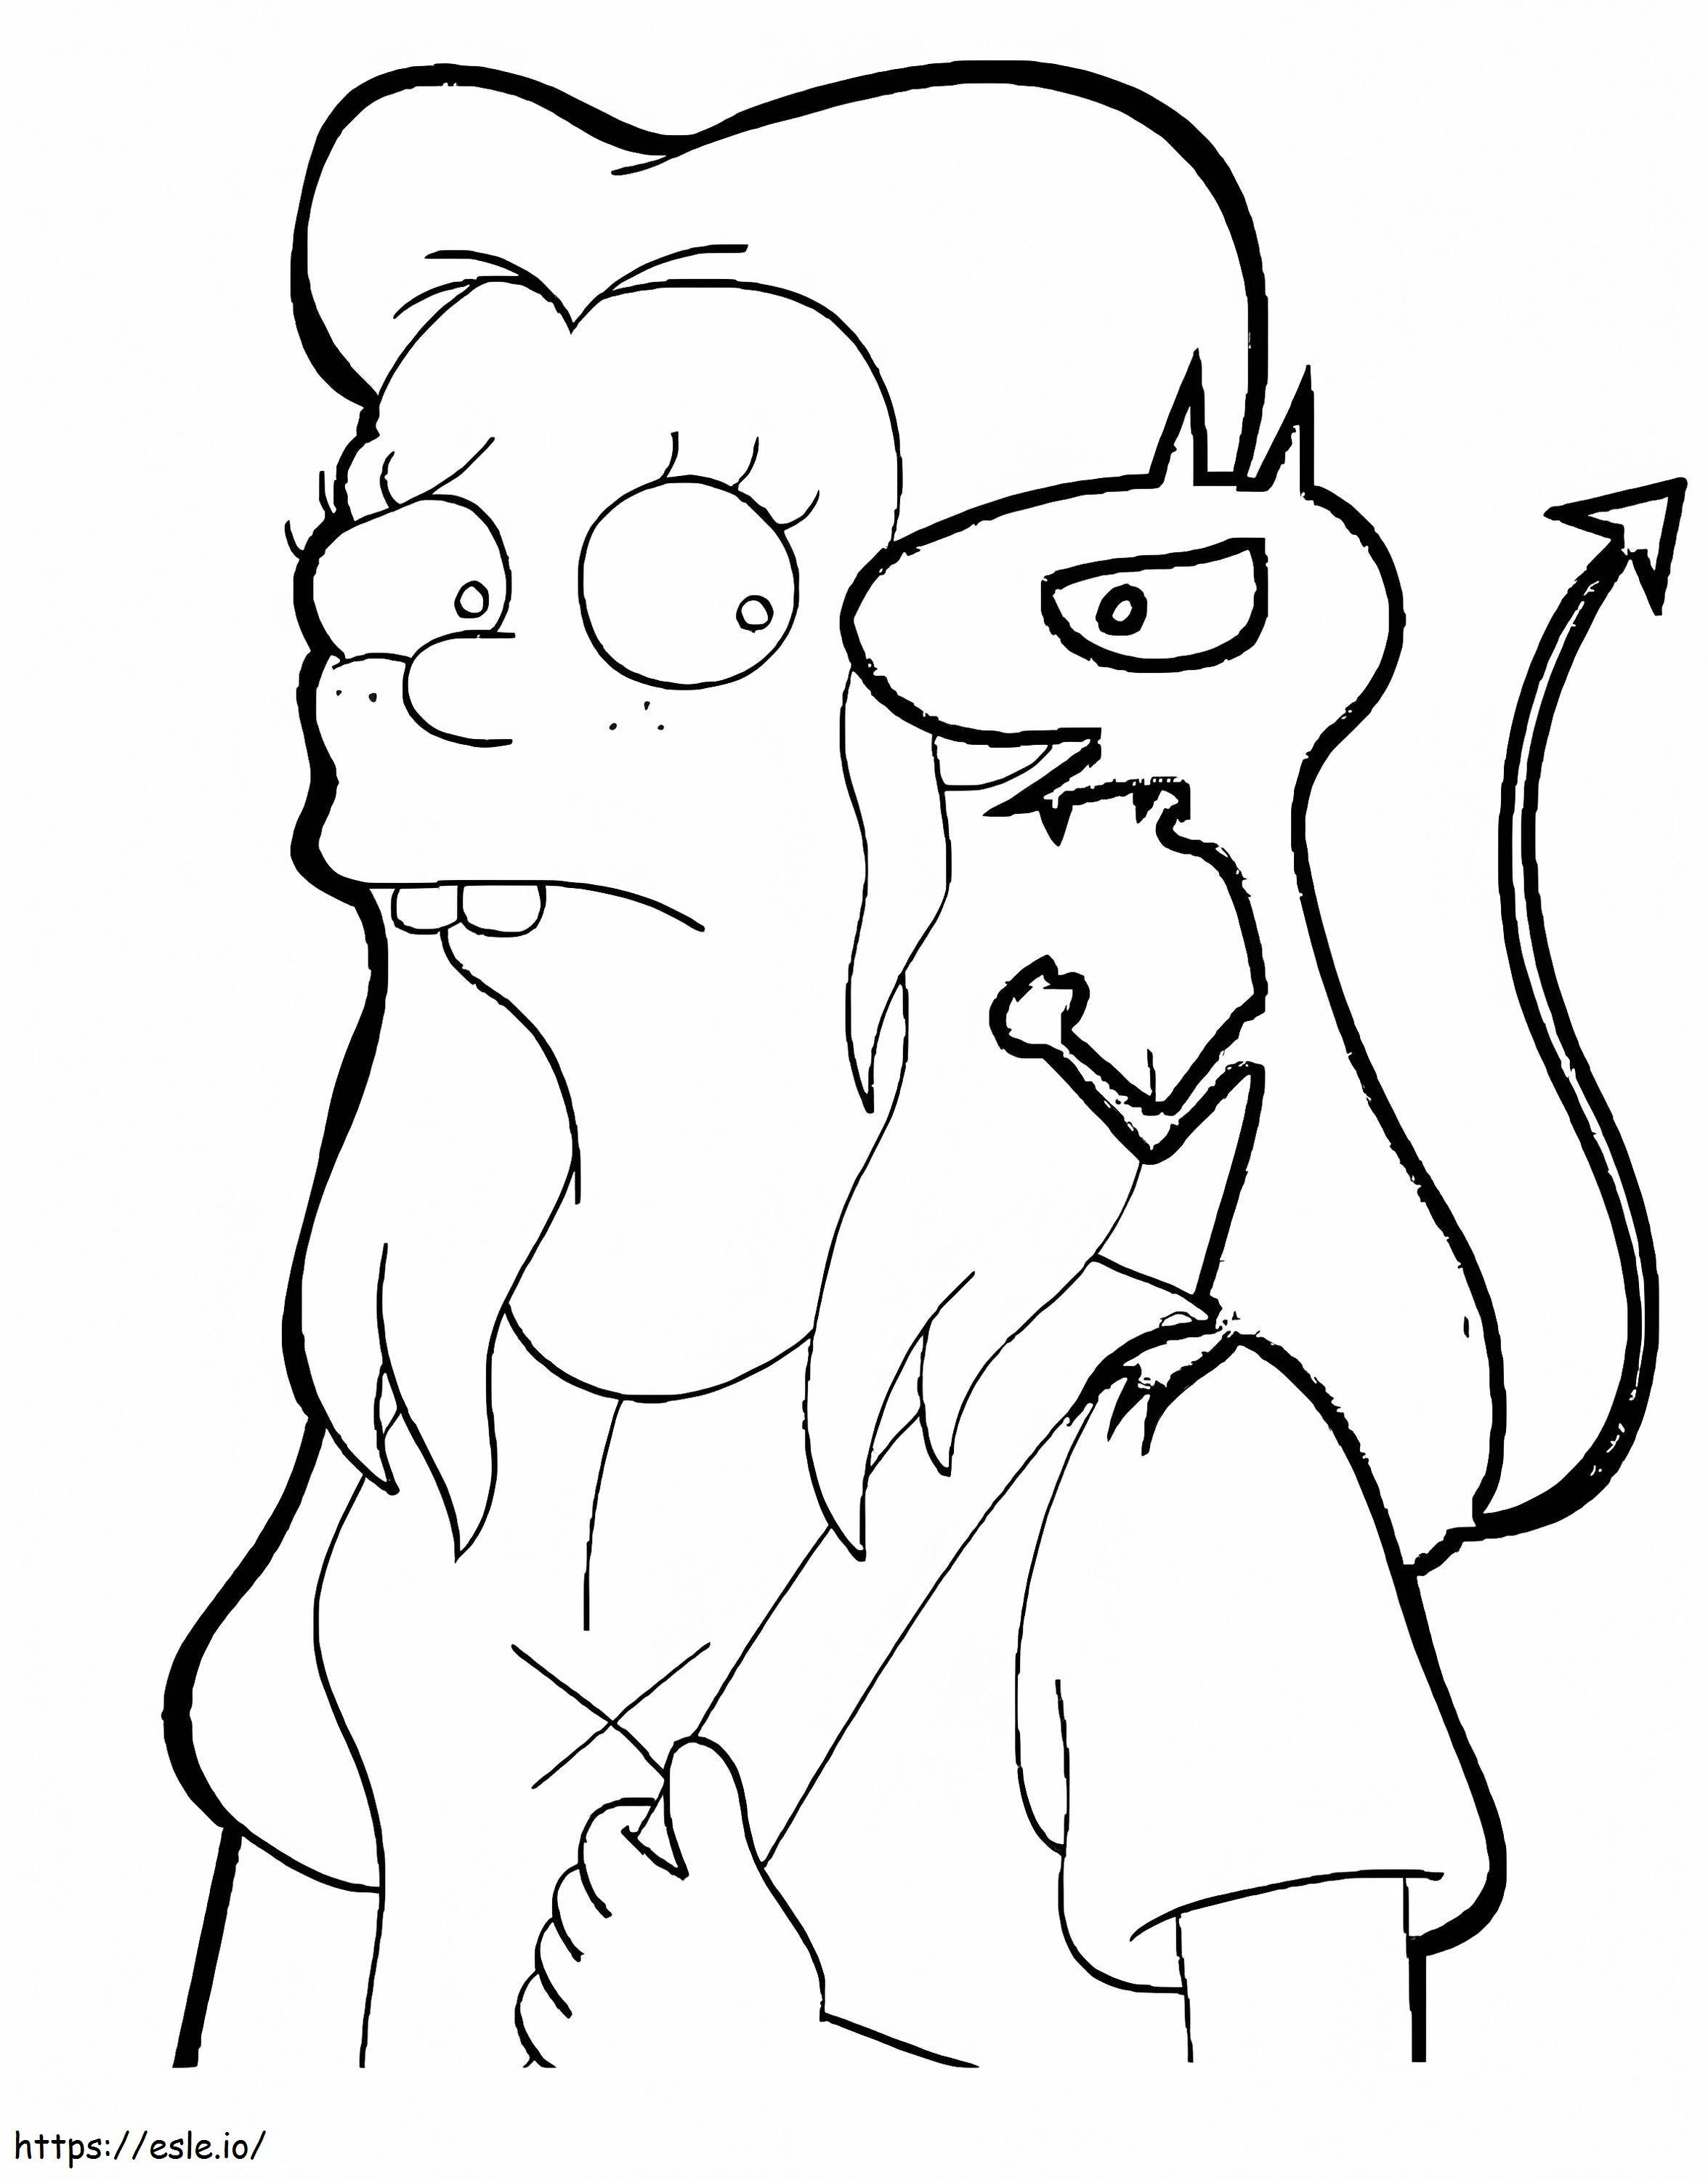 Queen Bean And Luci From Disenchantment coloring page